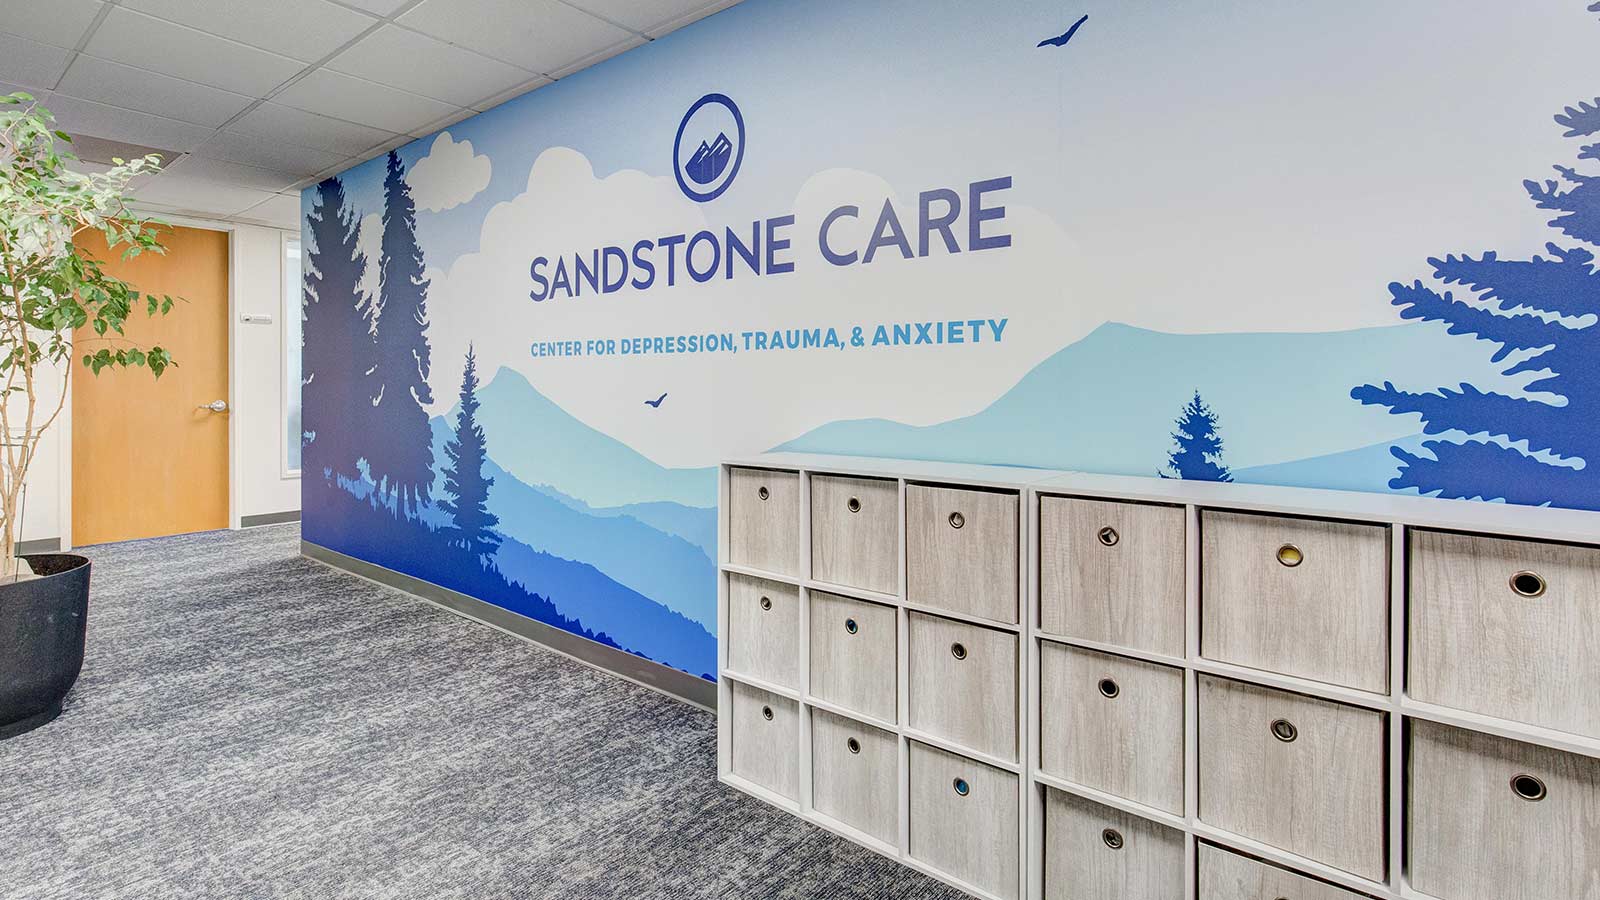 Wall mural with mountain scenery and the Sandstone Care logo in a hallway.